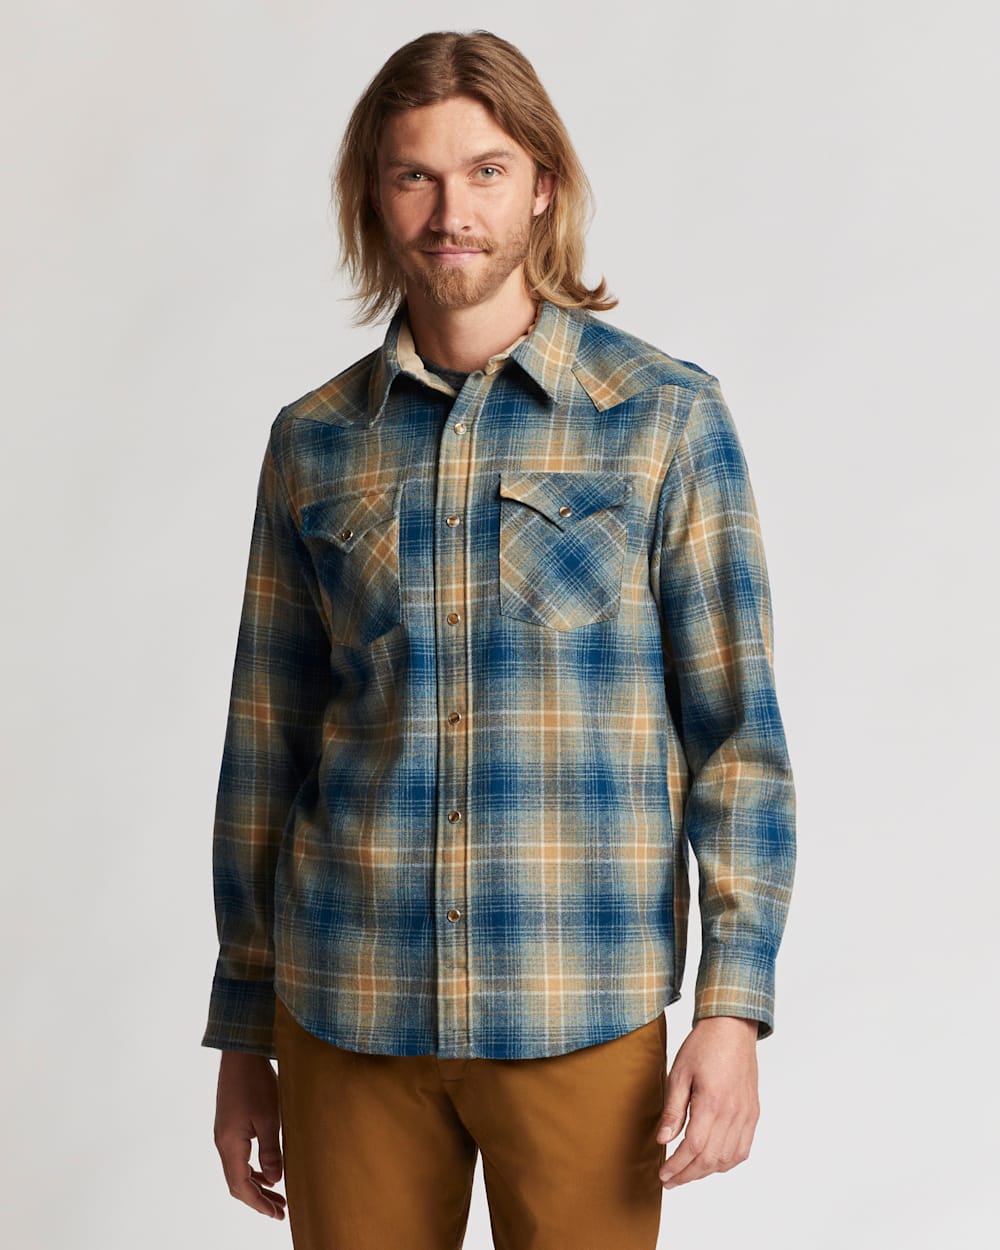 ALTERNATE VIEW OF MEN'S PLAID SNAP-FRONT WESTERN CANYON SHIRT IN TAN/BLUE MIX PLAID image number 7